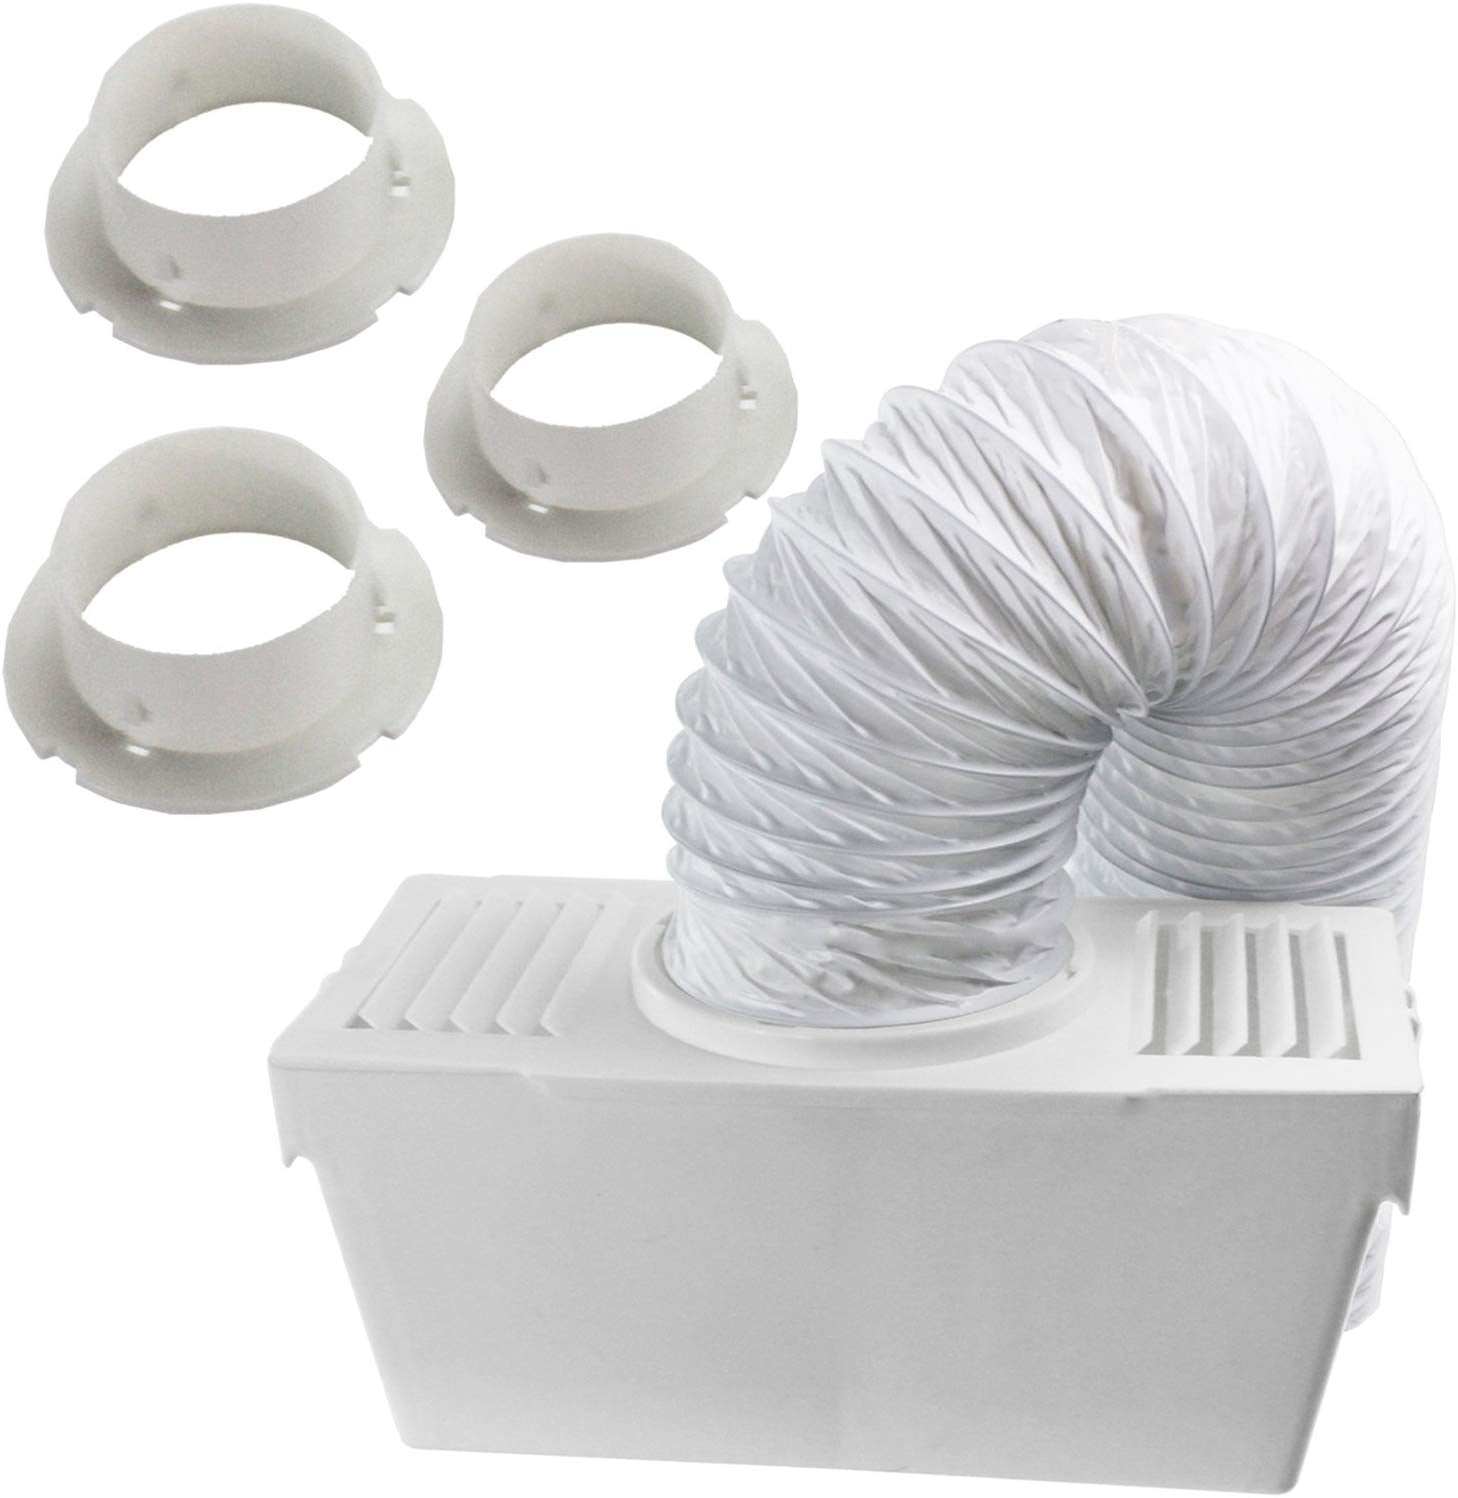 Vent Hose Condenser Kit with 3 x Adapters for Proline Tumble Dryer (1.2m)